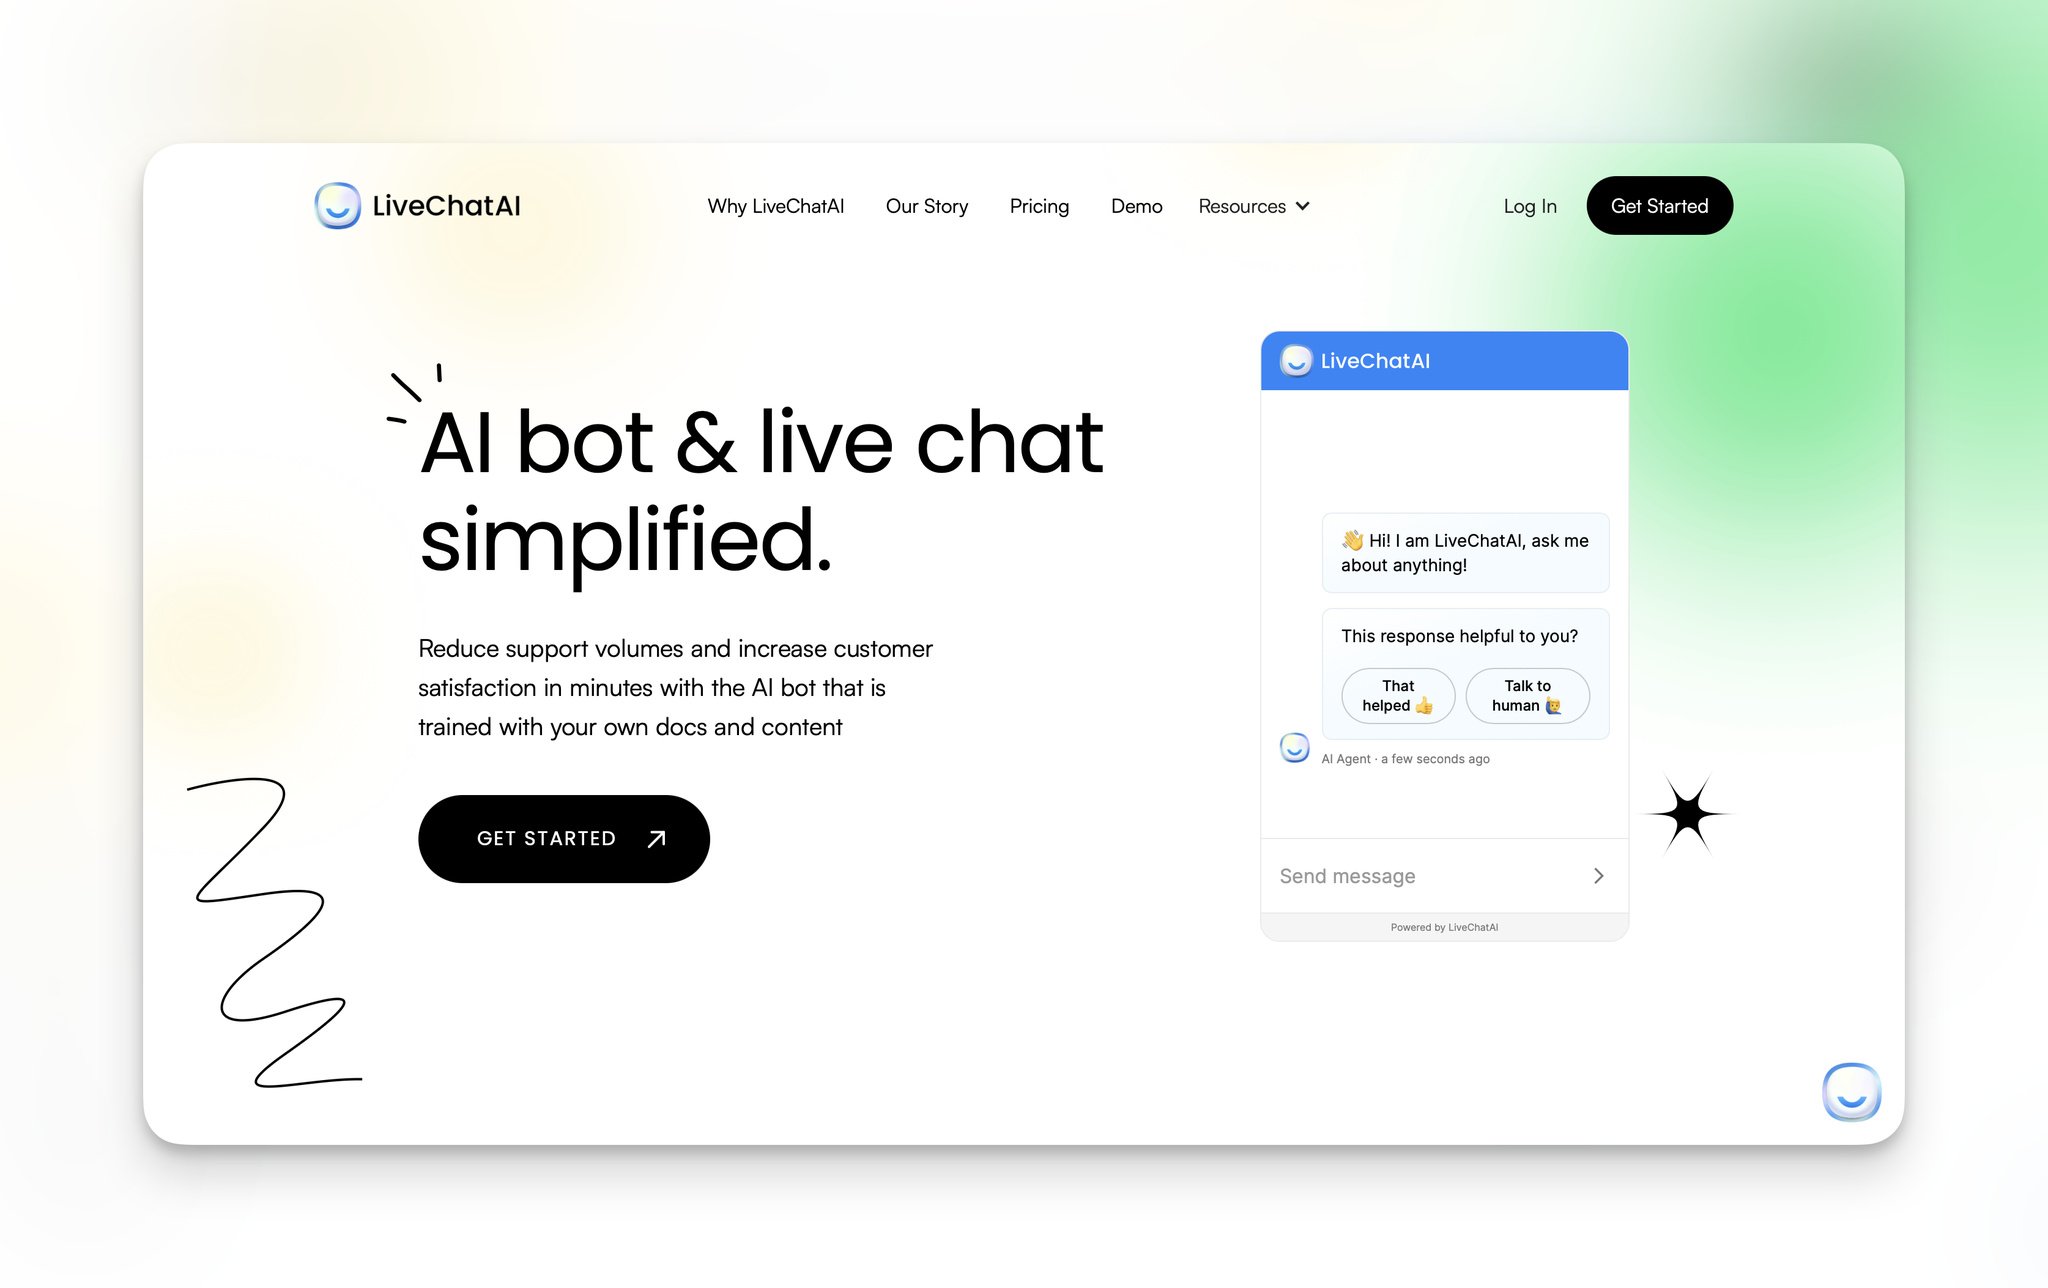 LiveChatAI's homepage with "AI bot & live chat simplified." headline on the left followed by a short piece of text about the capabilities of the tool and a black "Get Started" button and on the right, there is the interface of the chat window